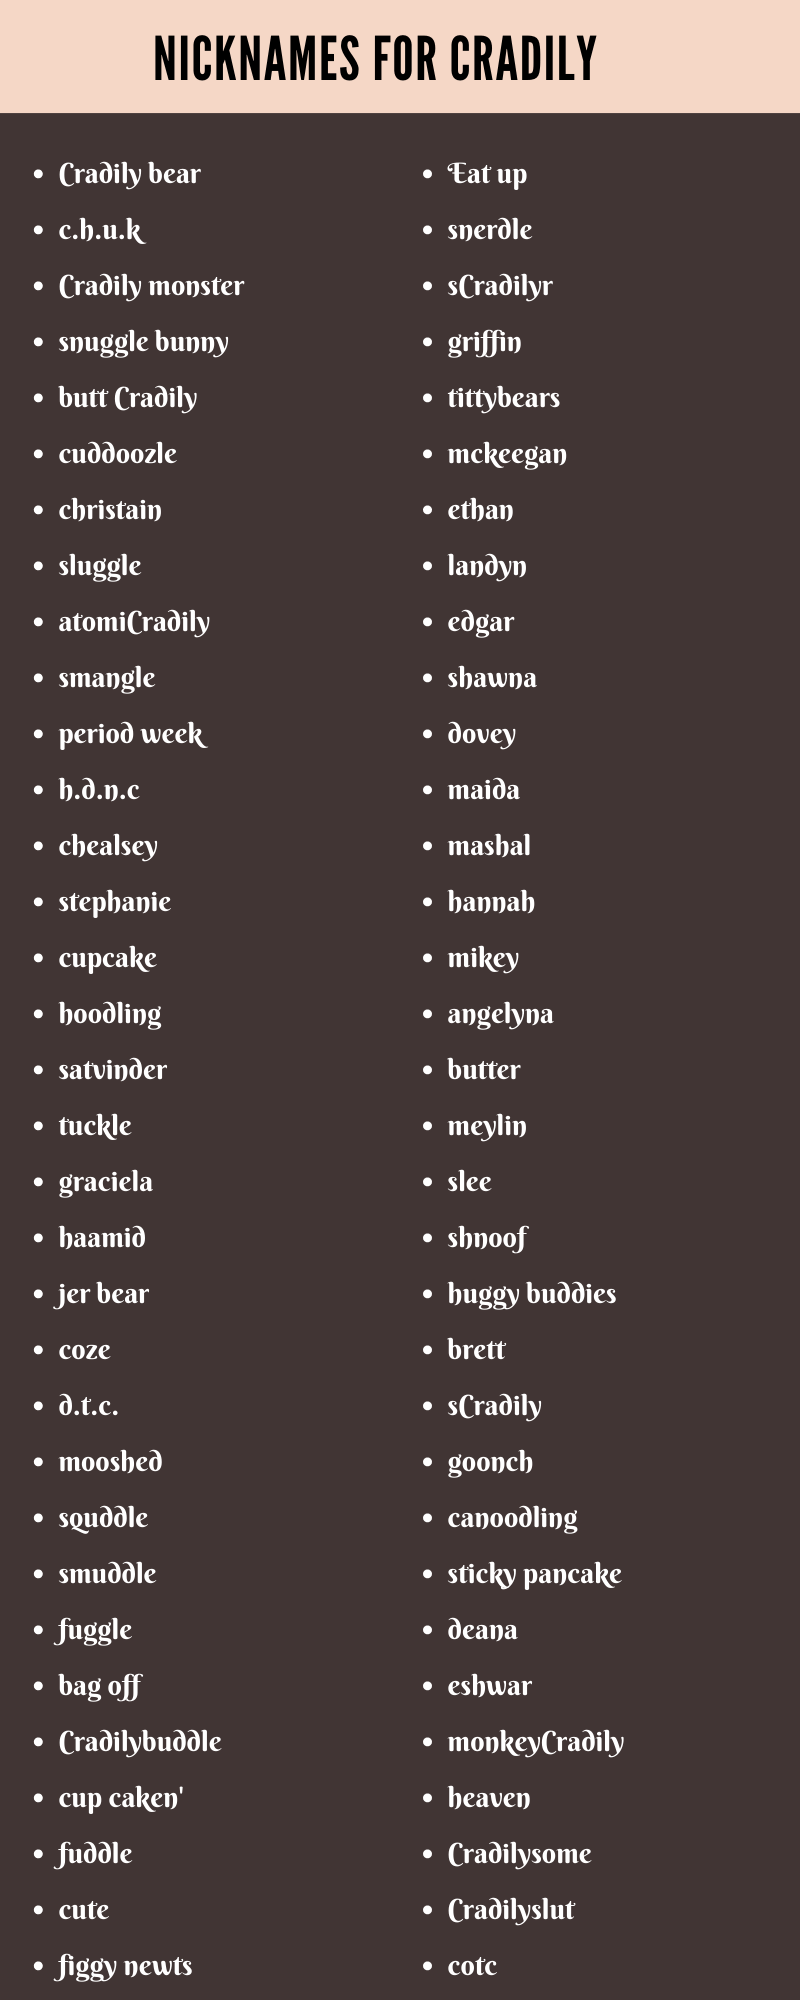 Nicknames For Cradily